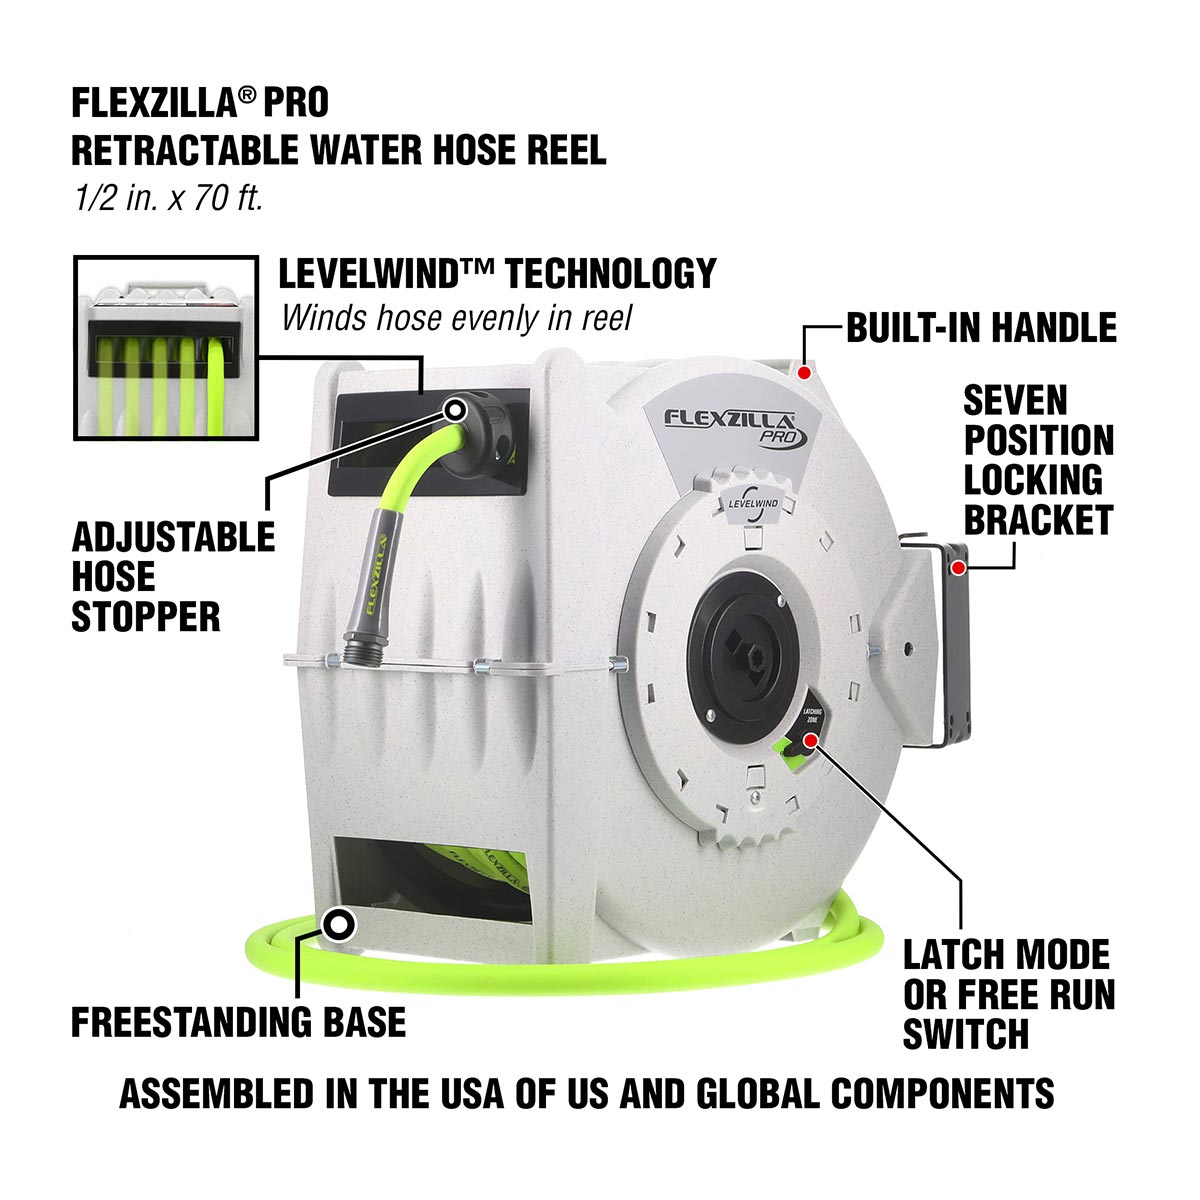 Flexzilla Retractable Water Hose Reel With Levelwind Technology 1/2" X 70'